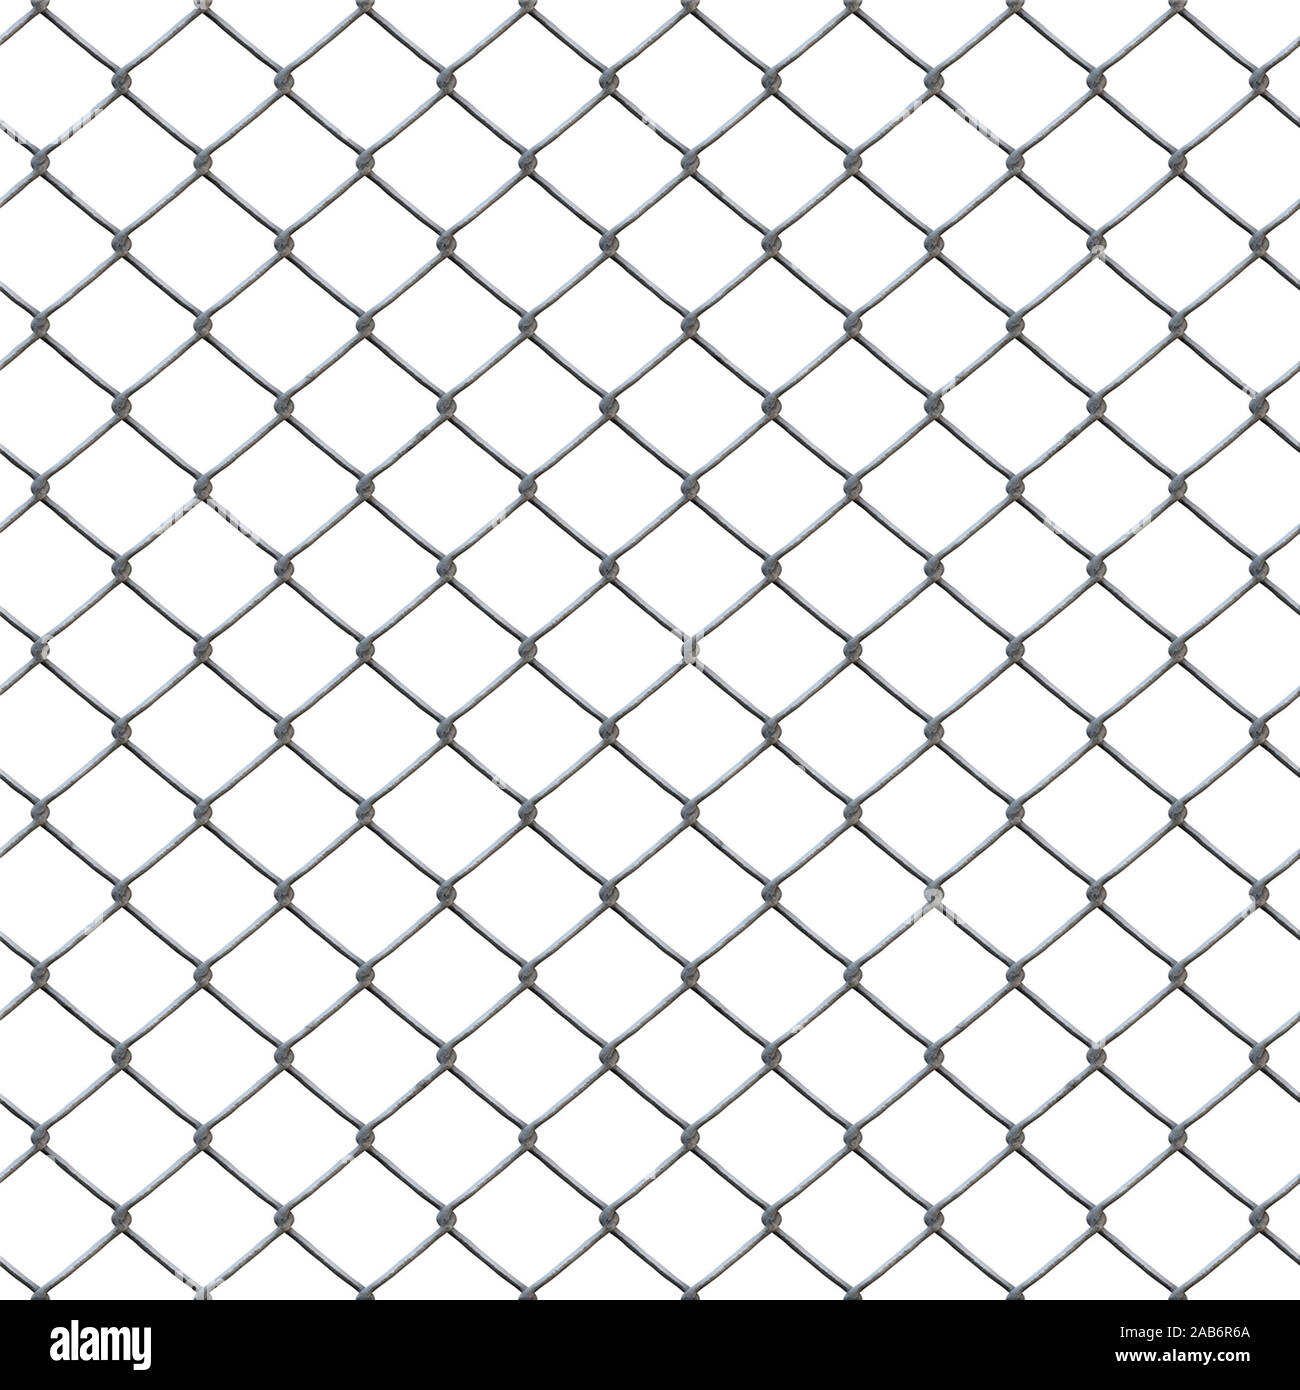 An illustration of a rusty chain link Stock Photo